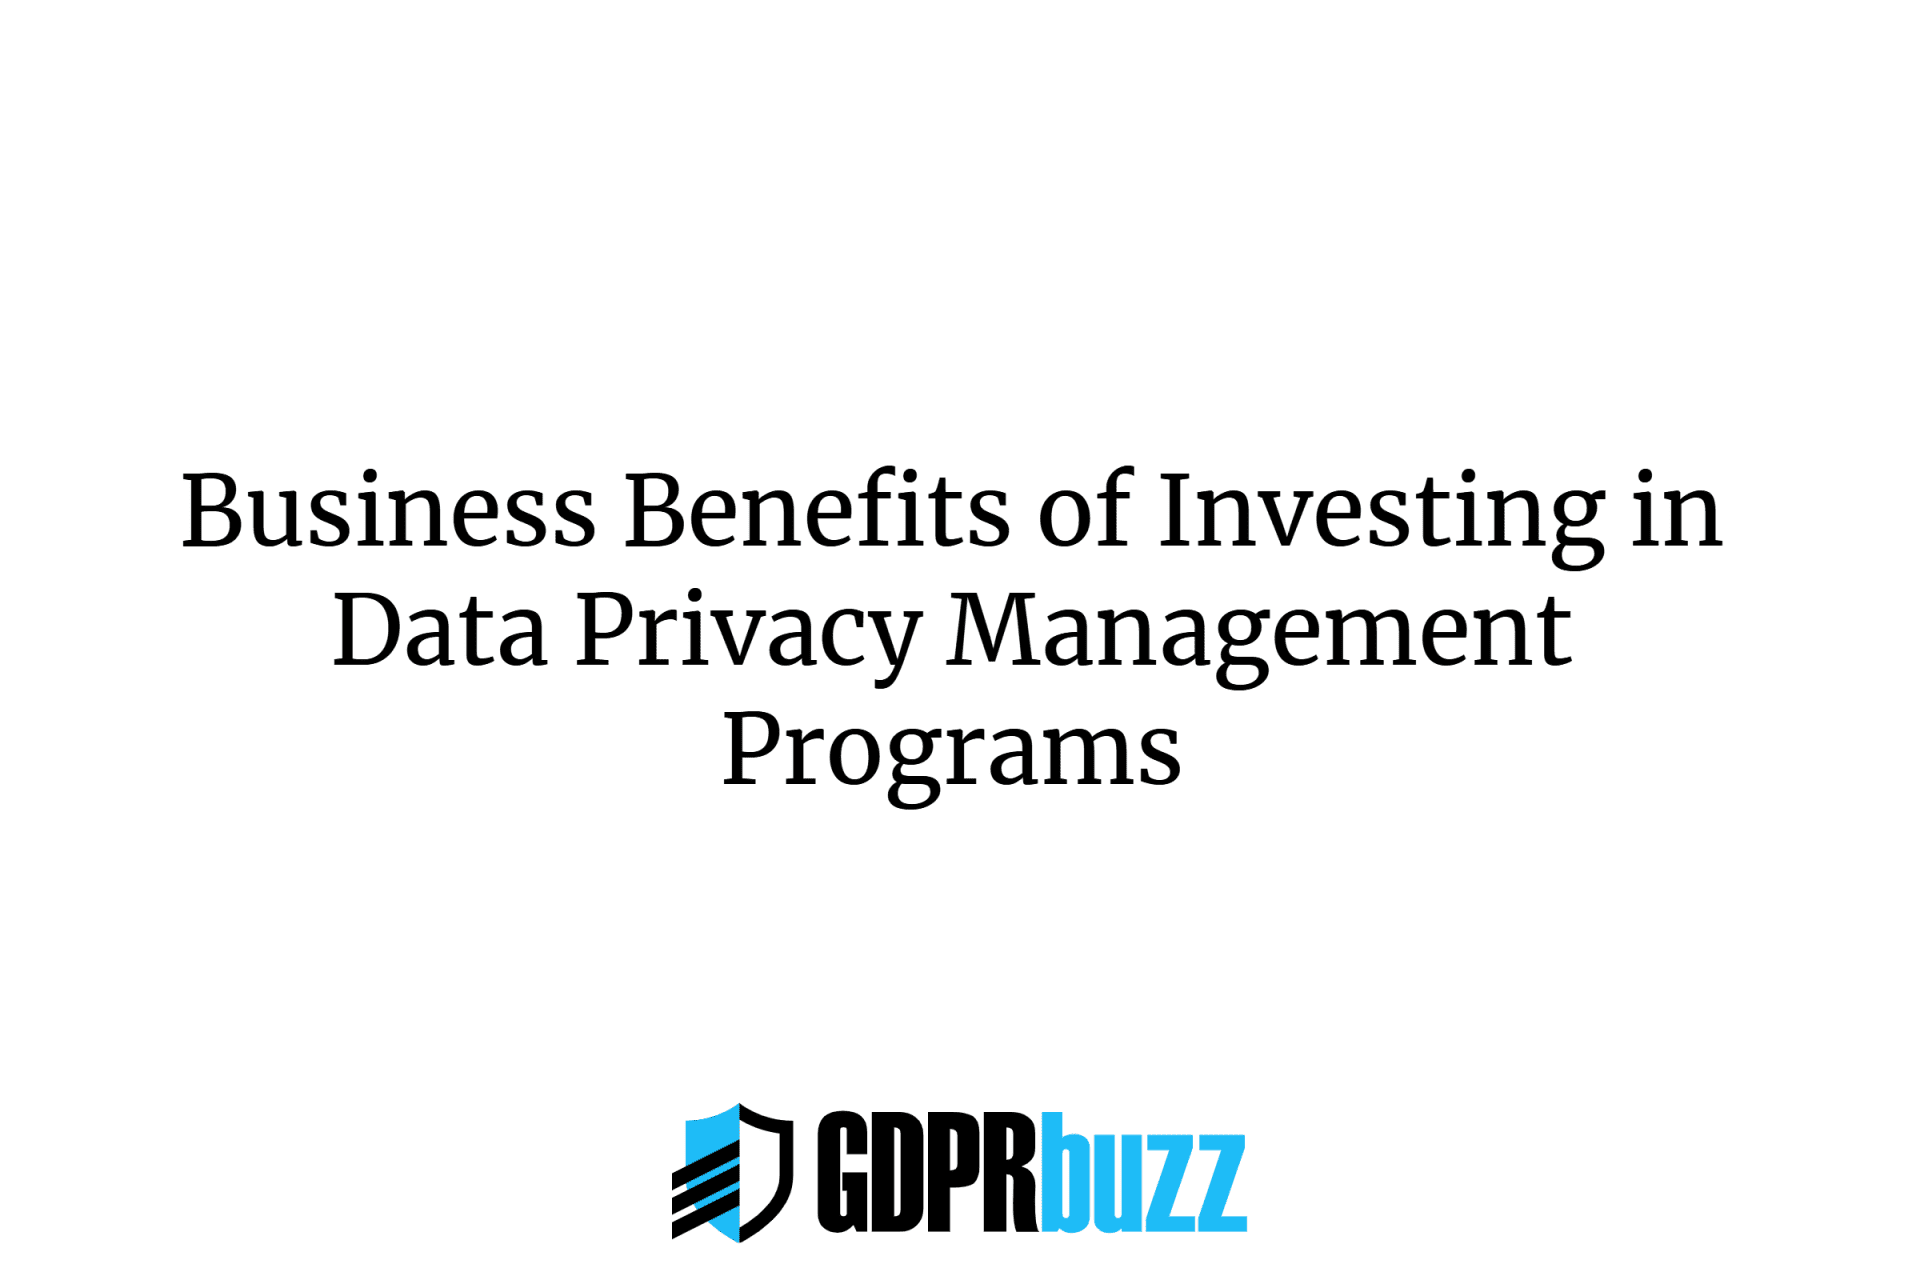 Business benefits of investing in data privacy management programs